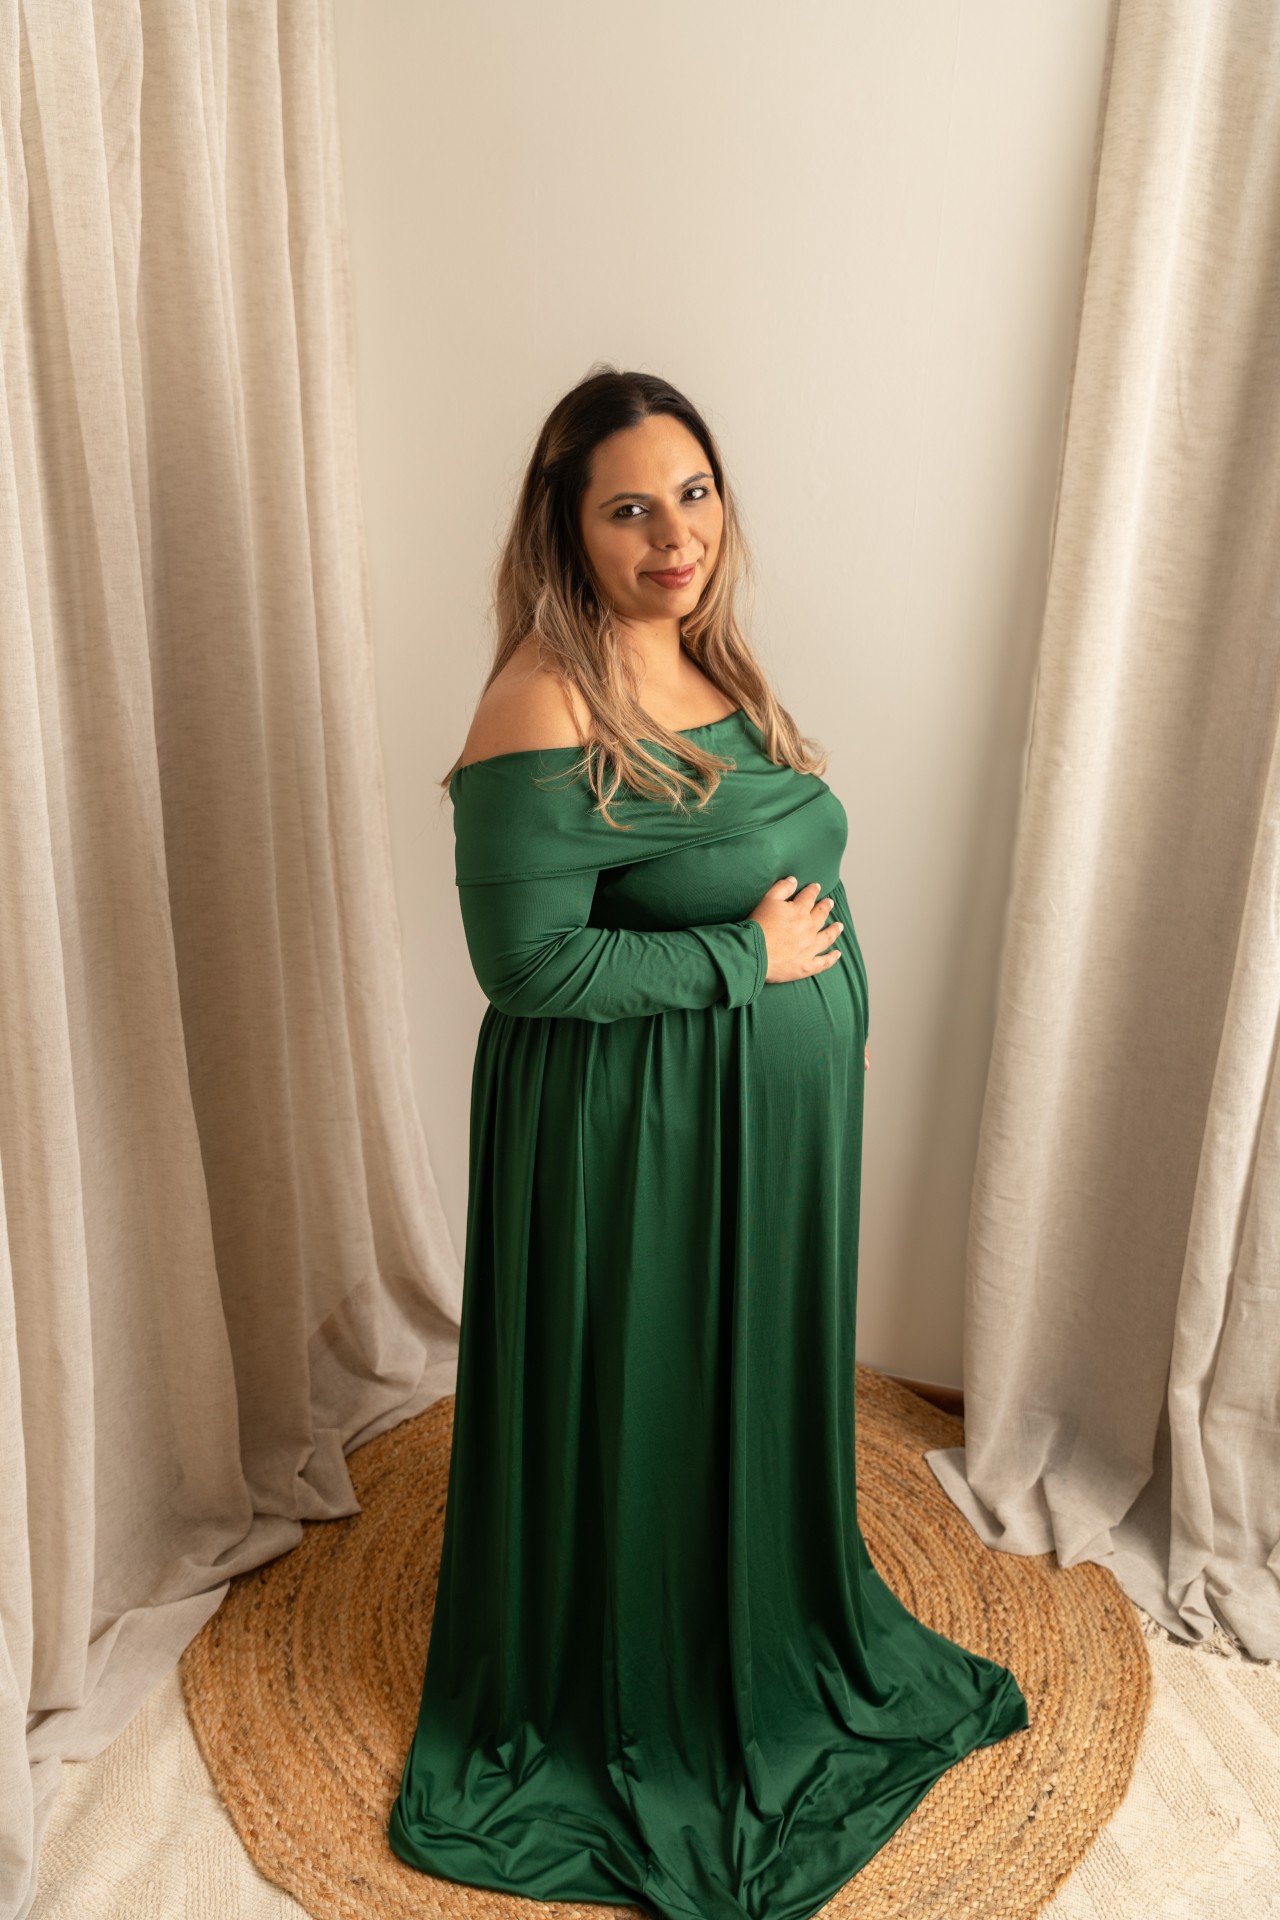 maternity portrait in the studio with green dress